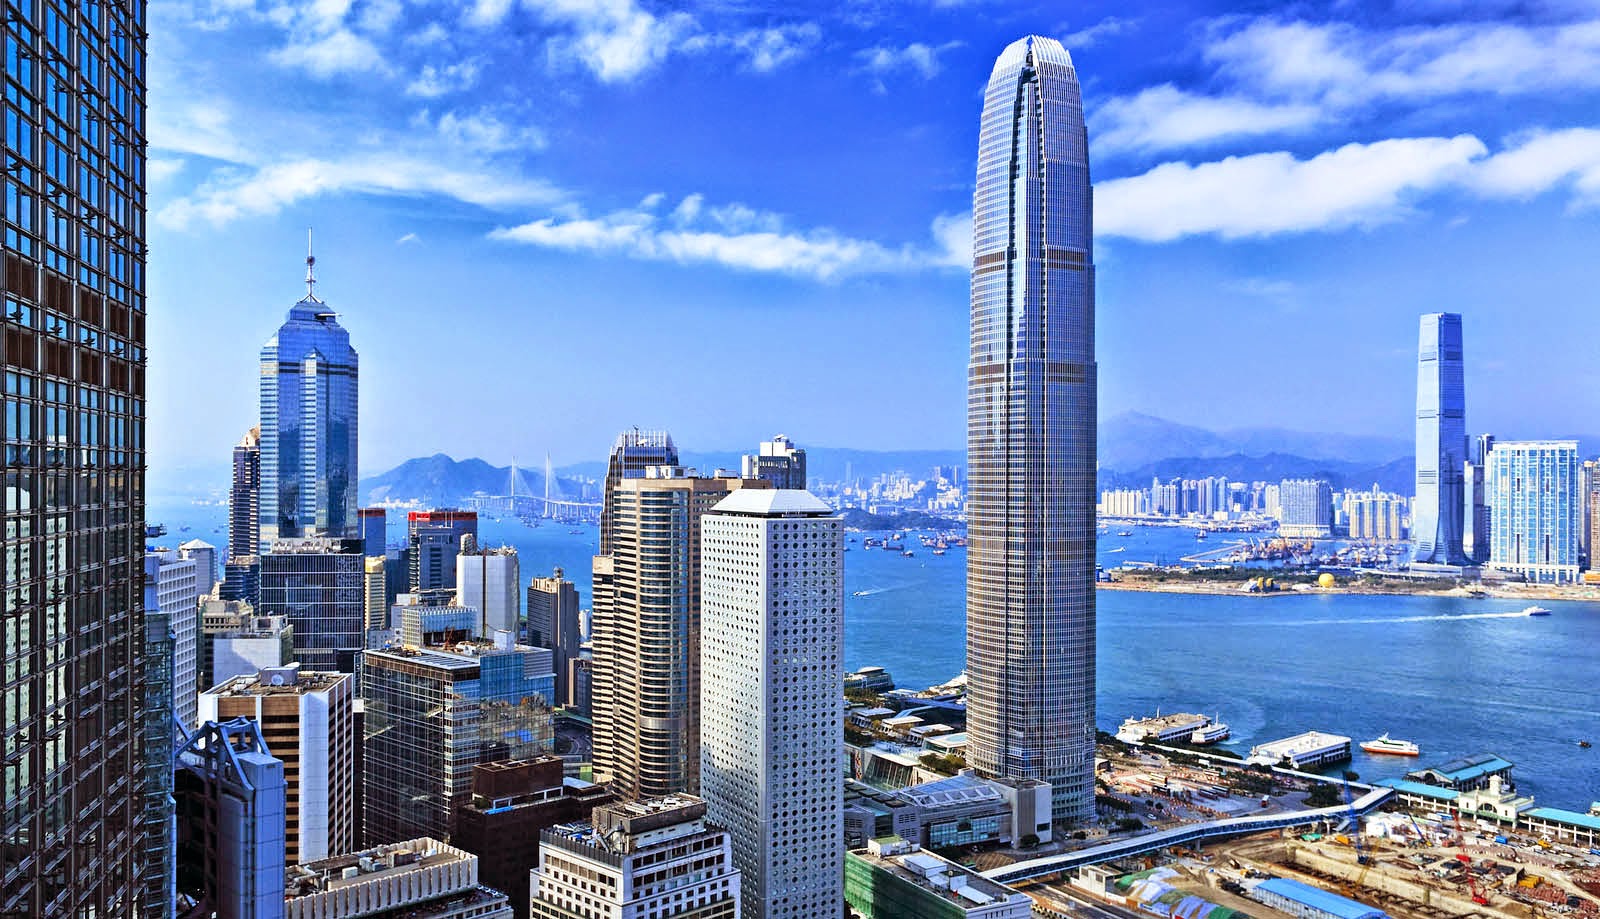 The most important tourist attractions in Hong Kong - Travel Guide